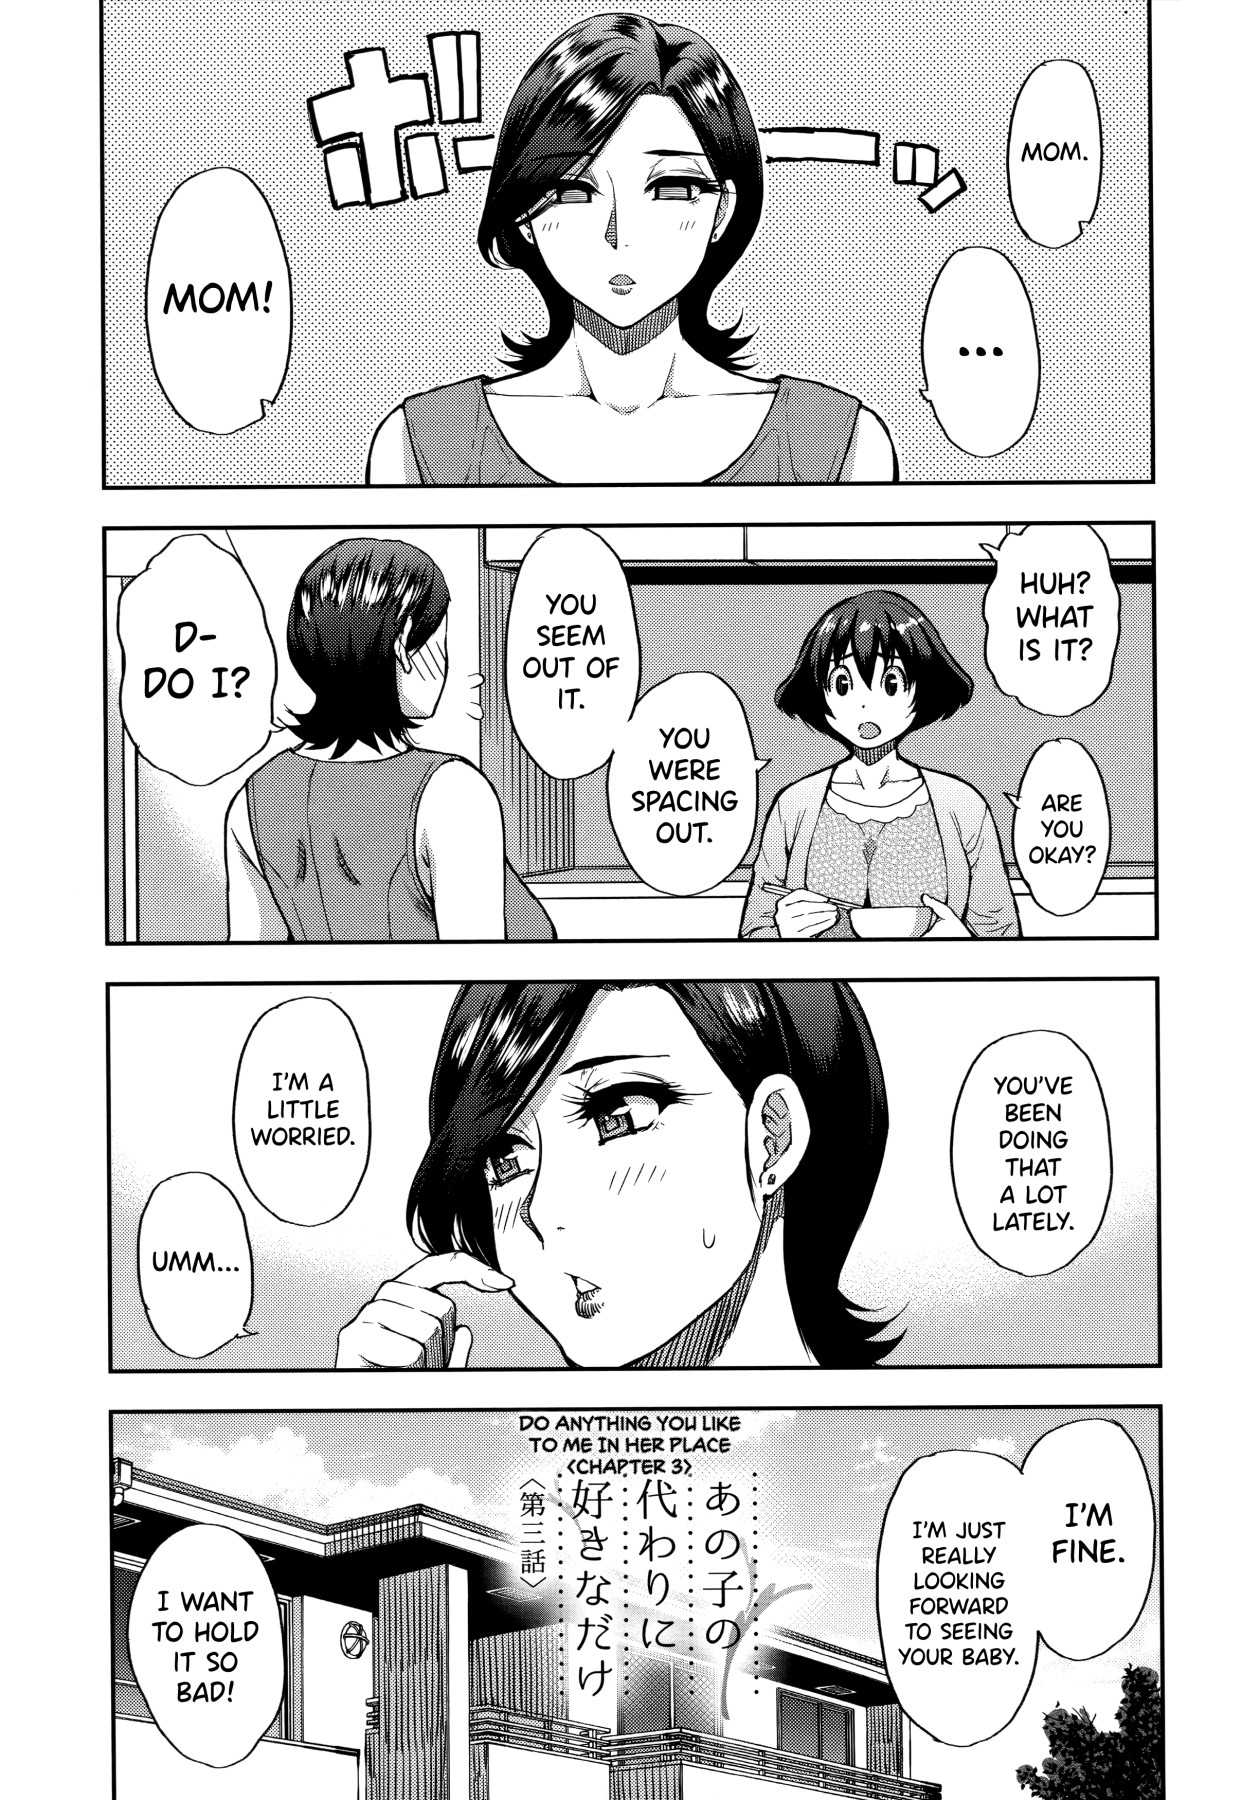 Hentai Manga Comic-Do Anything You Like To Me In Her Place-Chapter 3-1